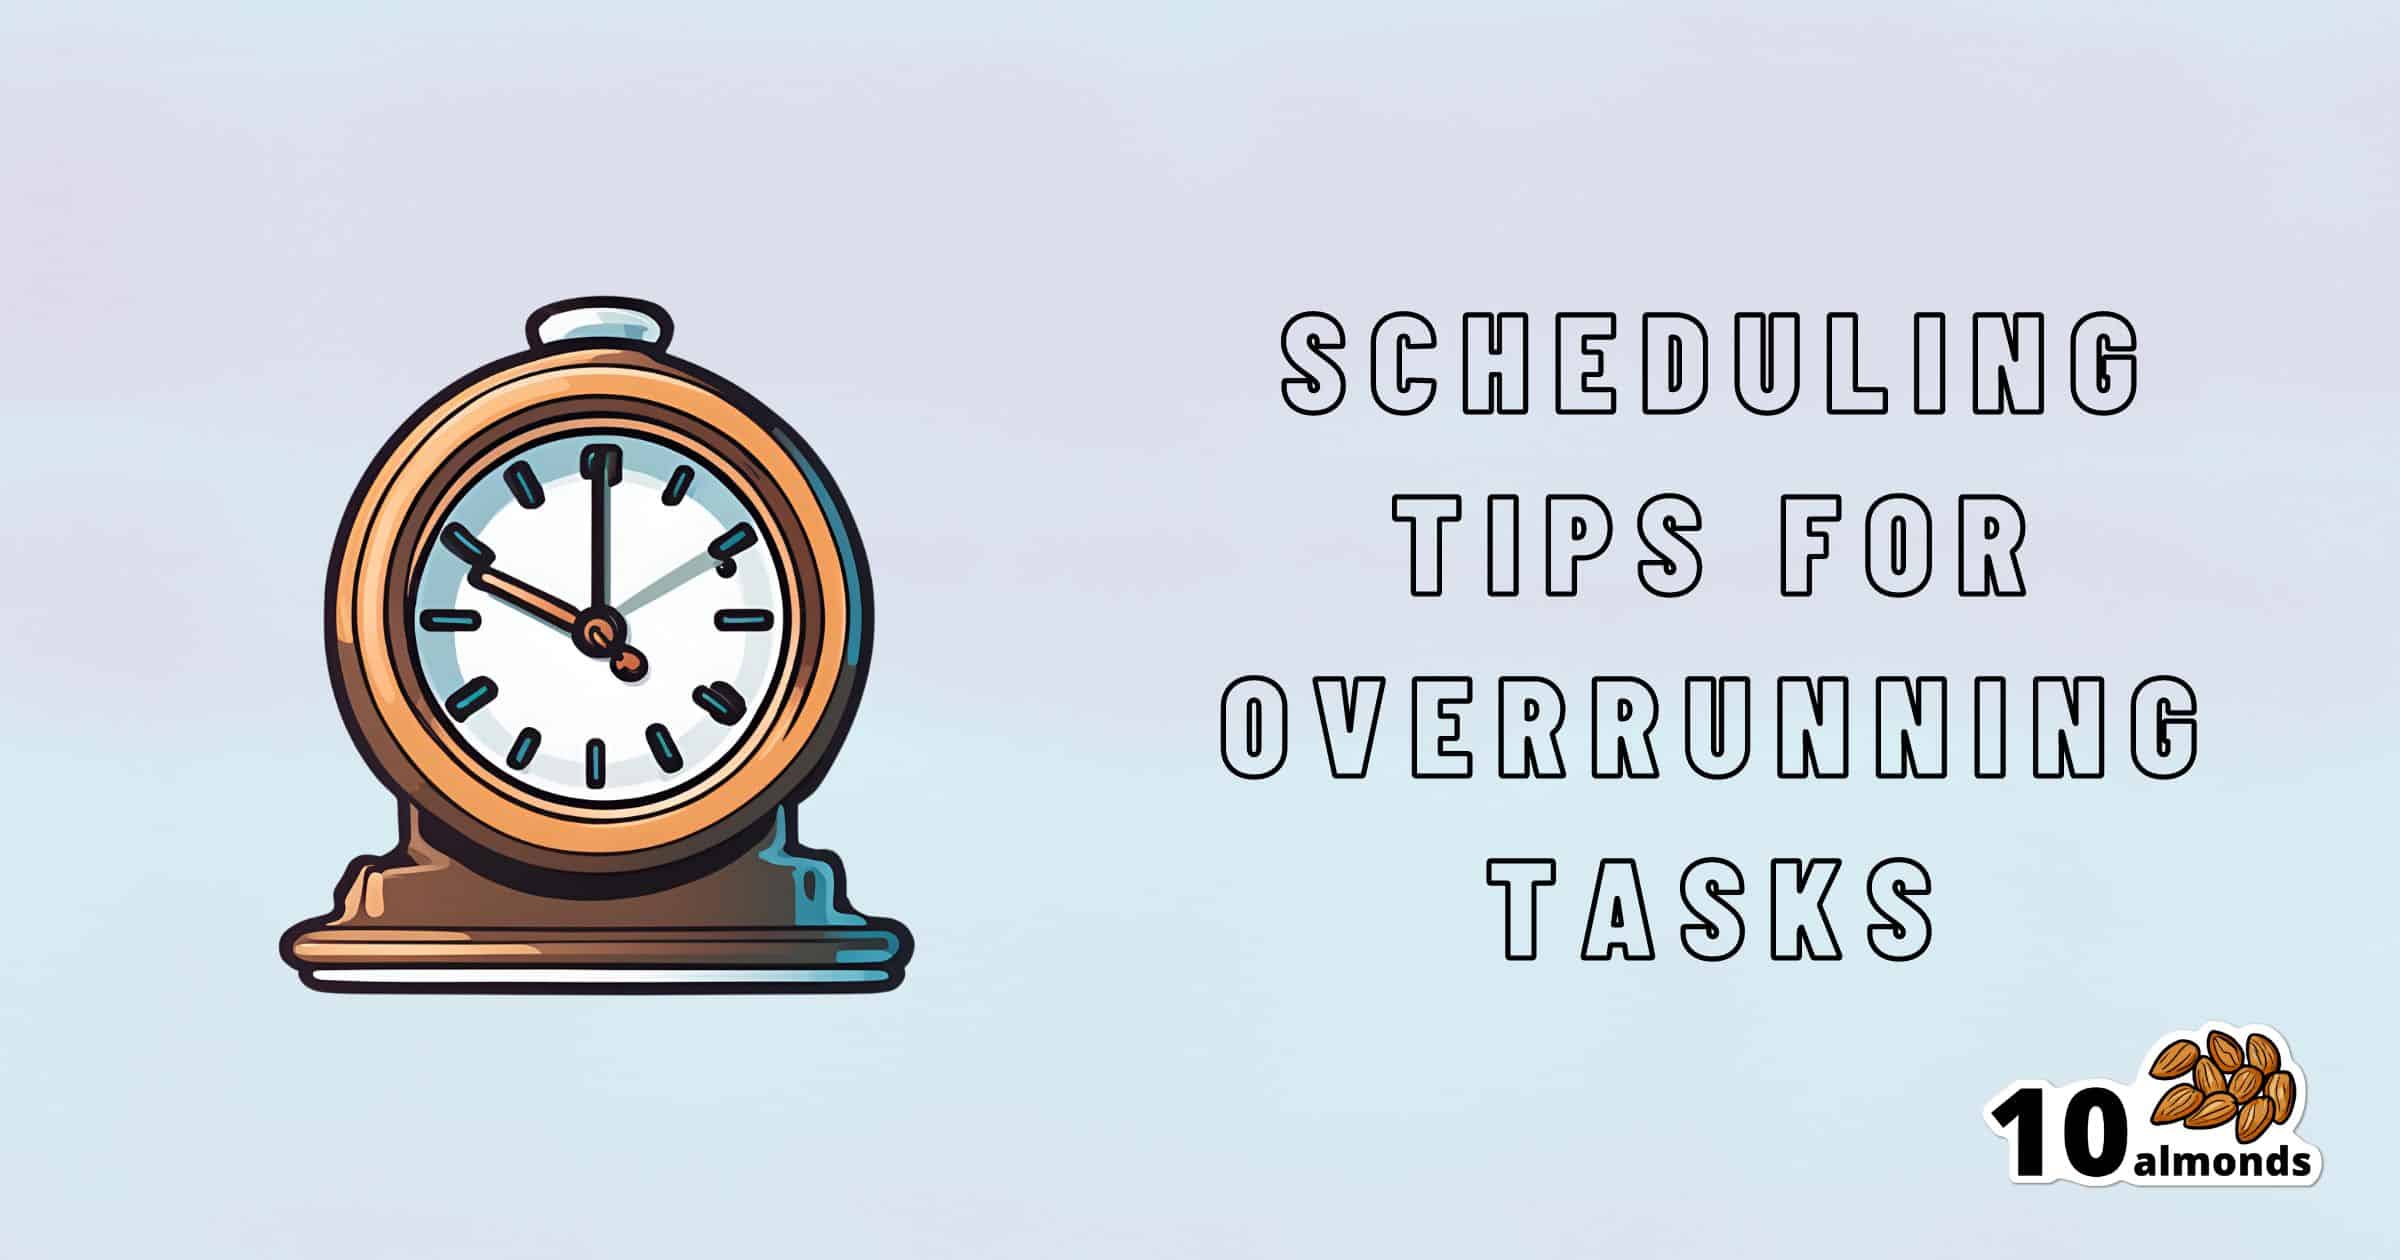 An illustration of a clock on the left with text on the right that reads, "Scheduling Tips for Overrunning Tasks." The bottom right corner has a logo featuring the number "10" followed by an image of almonds.